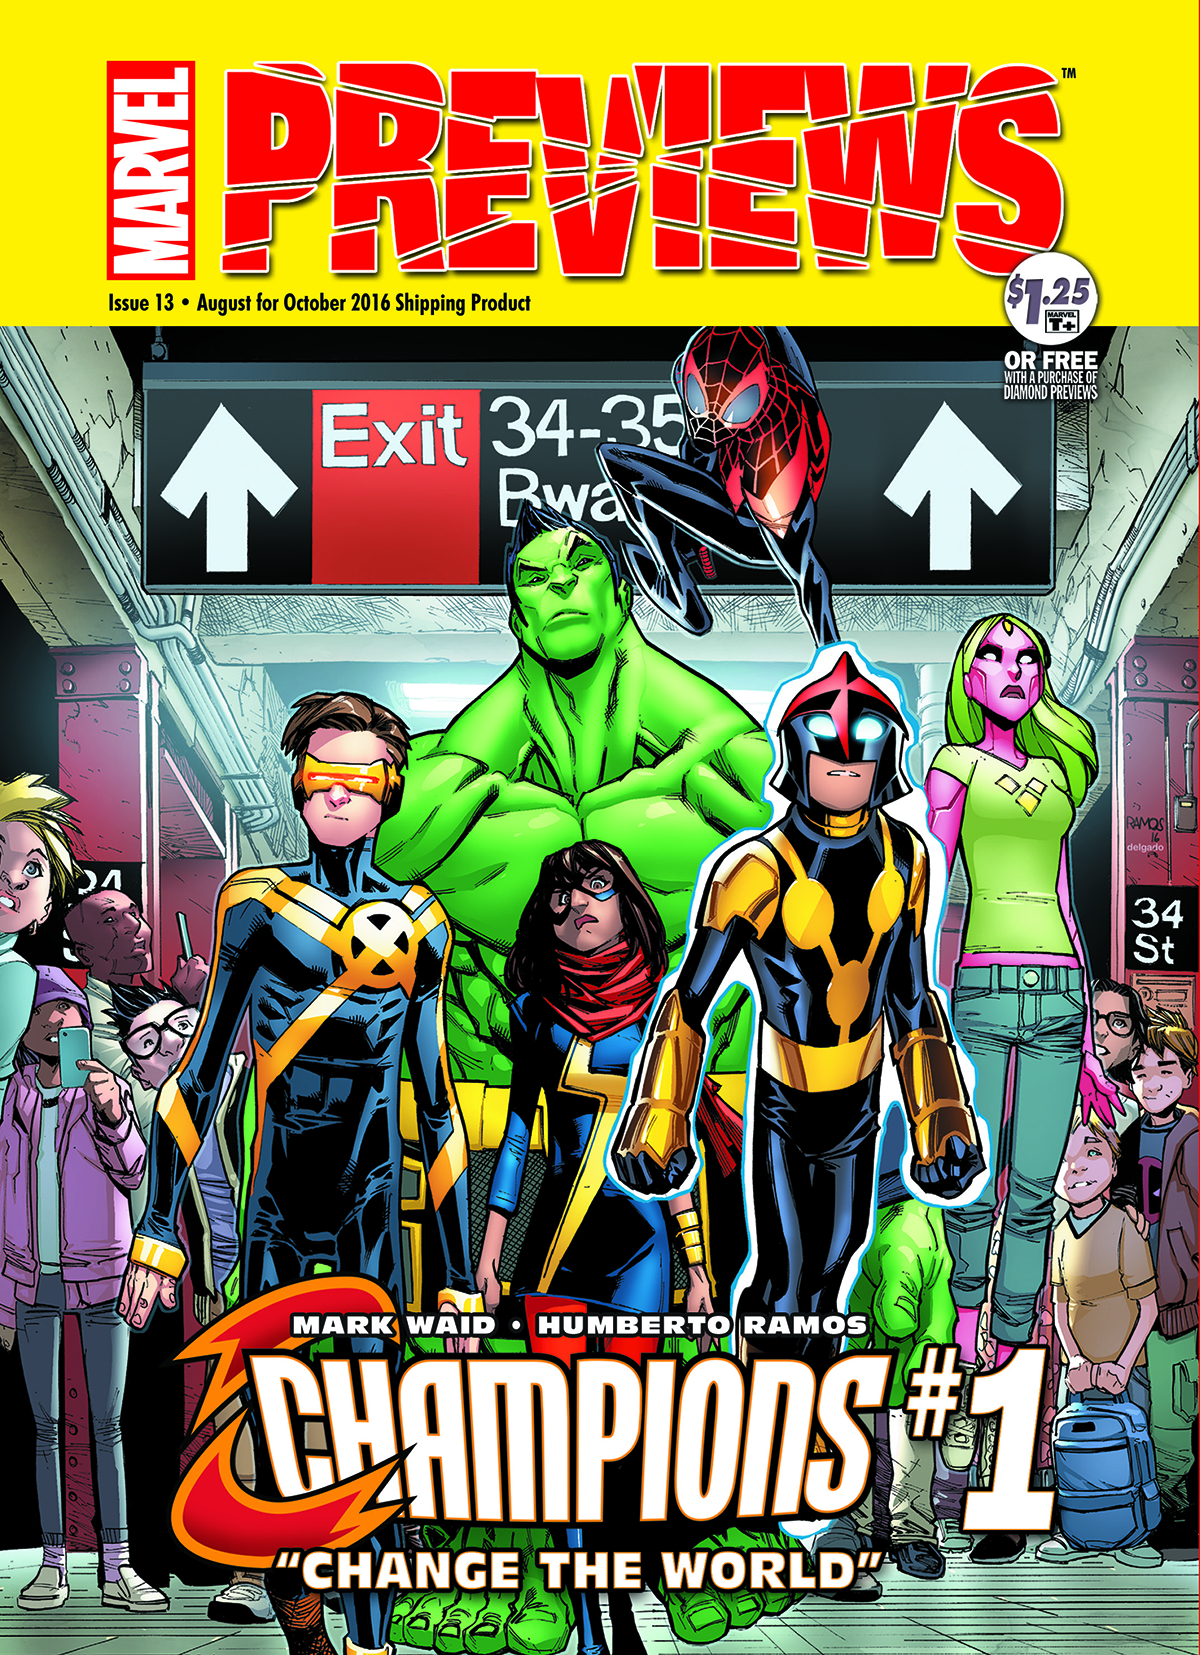 MARVEL PREVIEWS #13 AUGUST 2016 EXTRAS (Net)